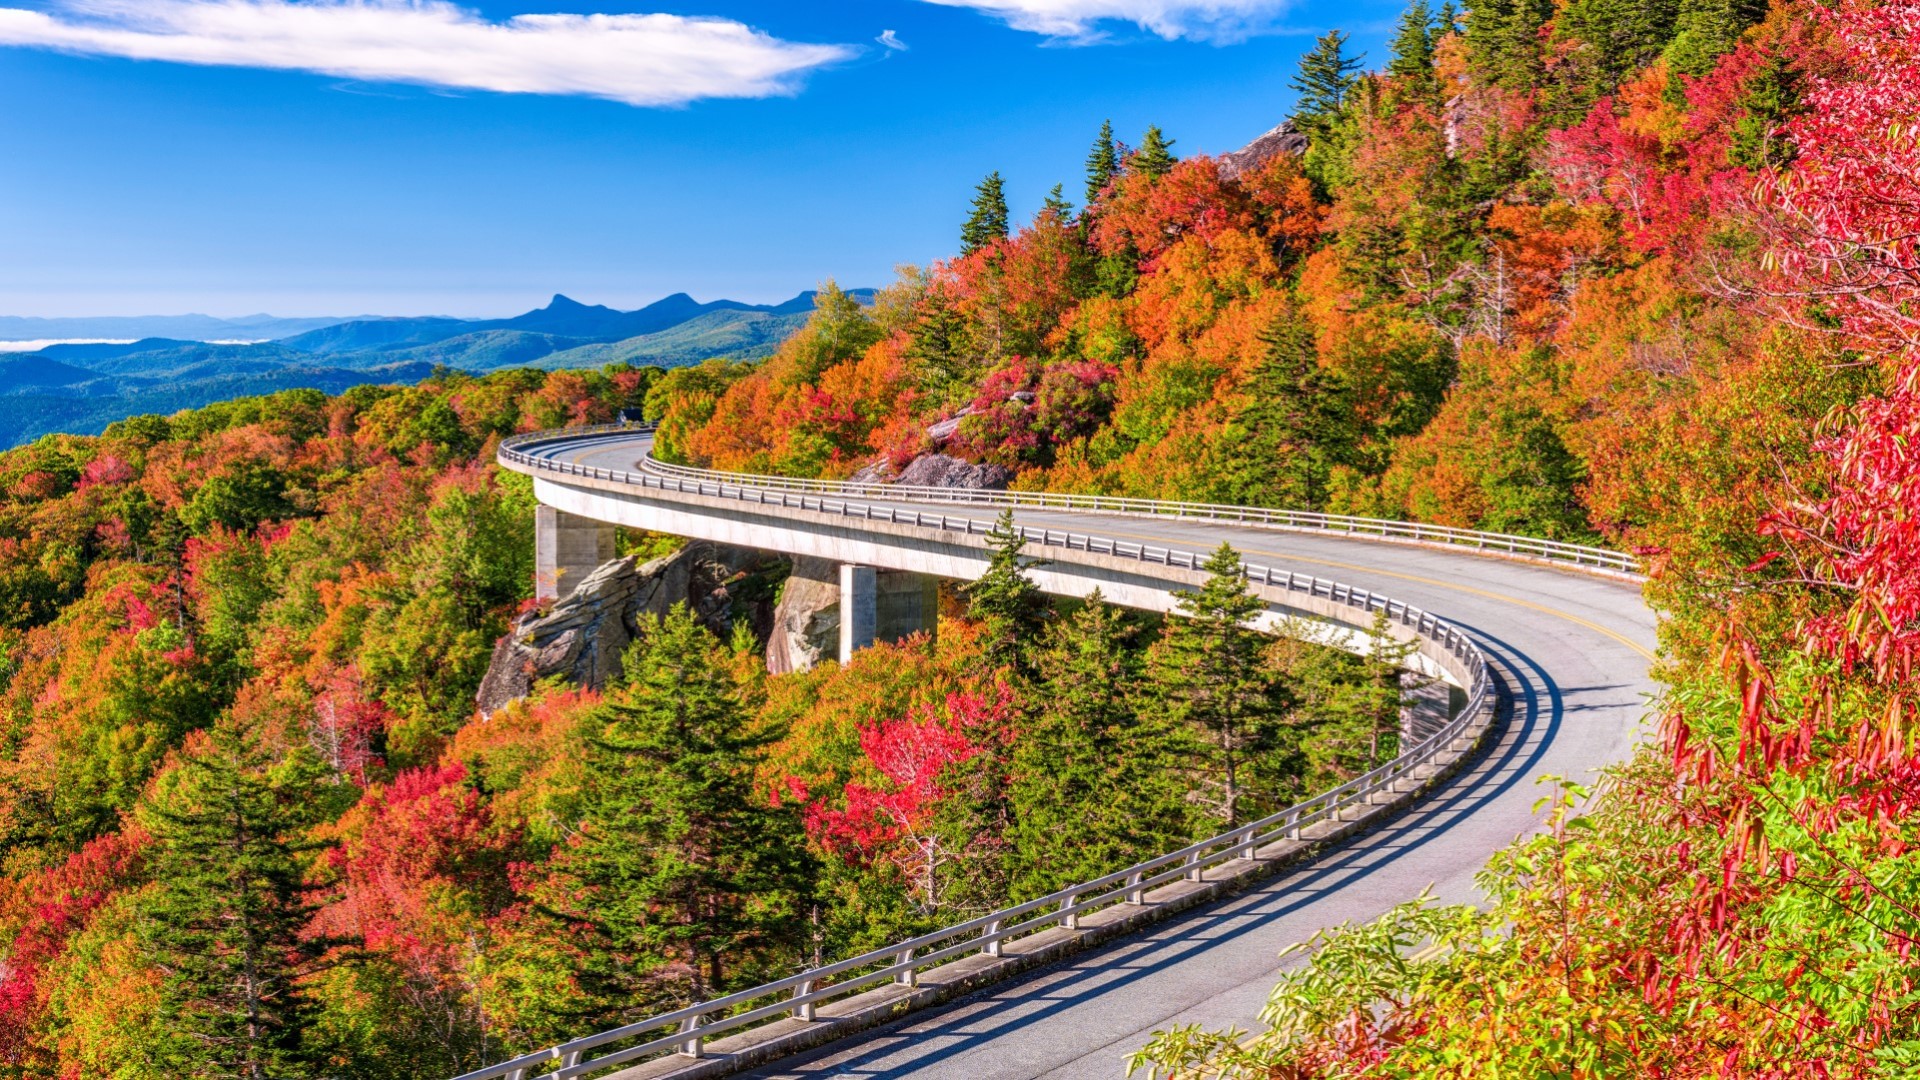 Linn Cove Viaduct in North Carolina in the foreground with fall foliage in the mountains